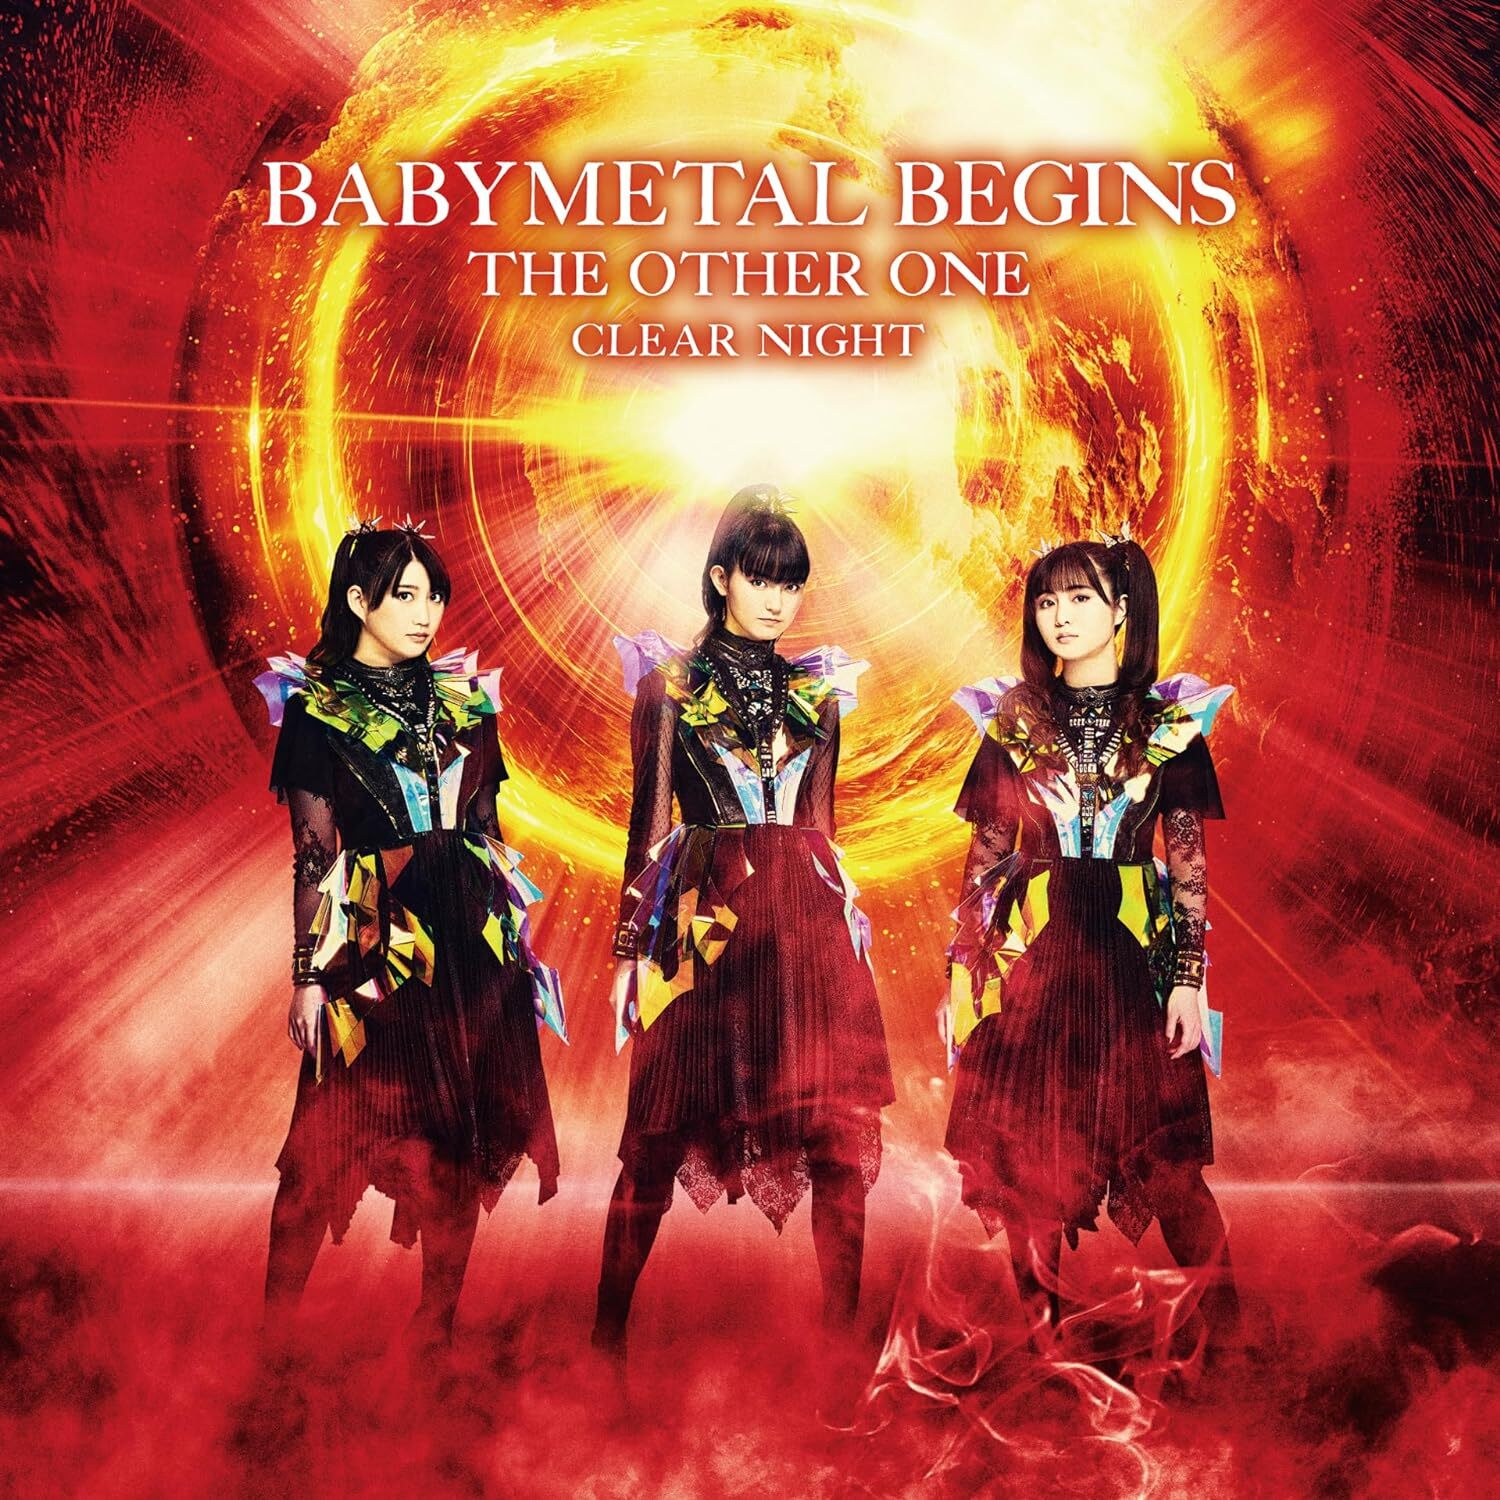 Babymetal : BabyMetal Begins The Other One - Clear Night